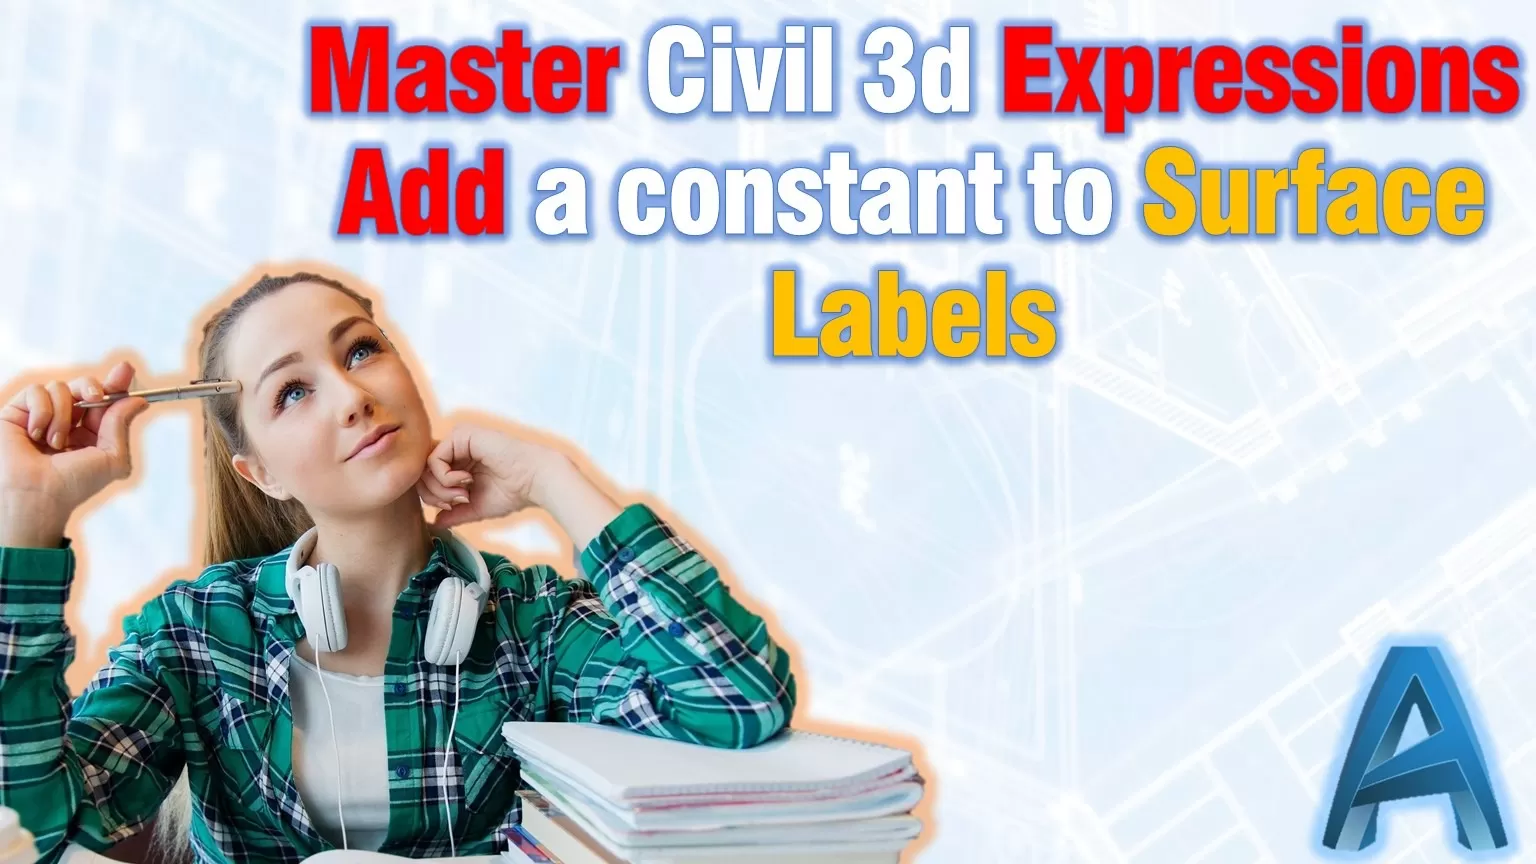 How to add a constant to surface labels in civil 3d